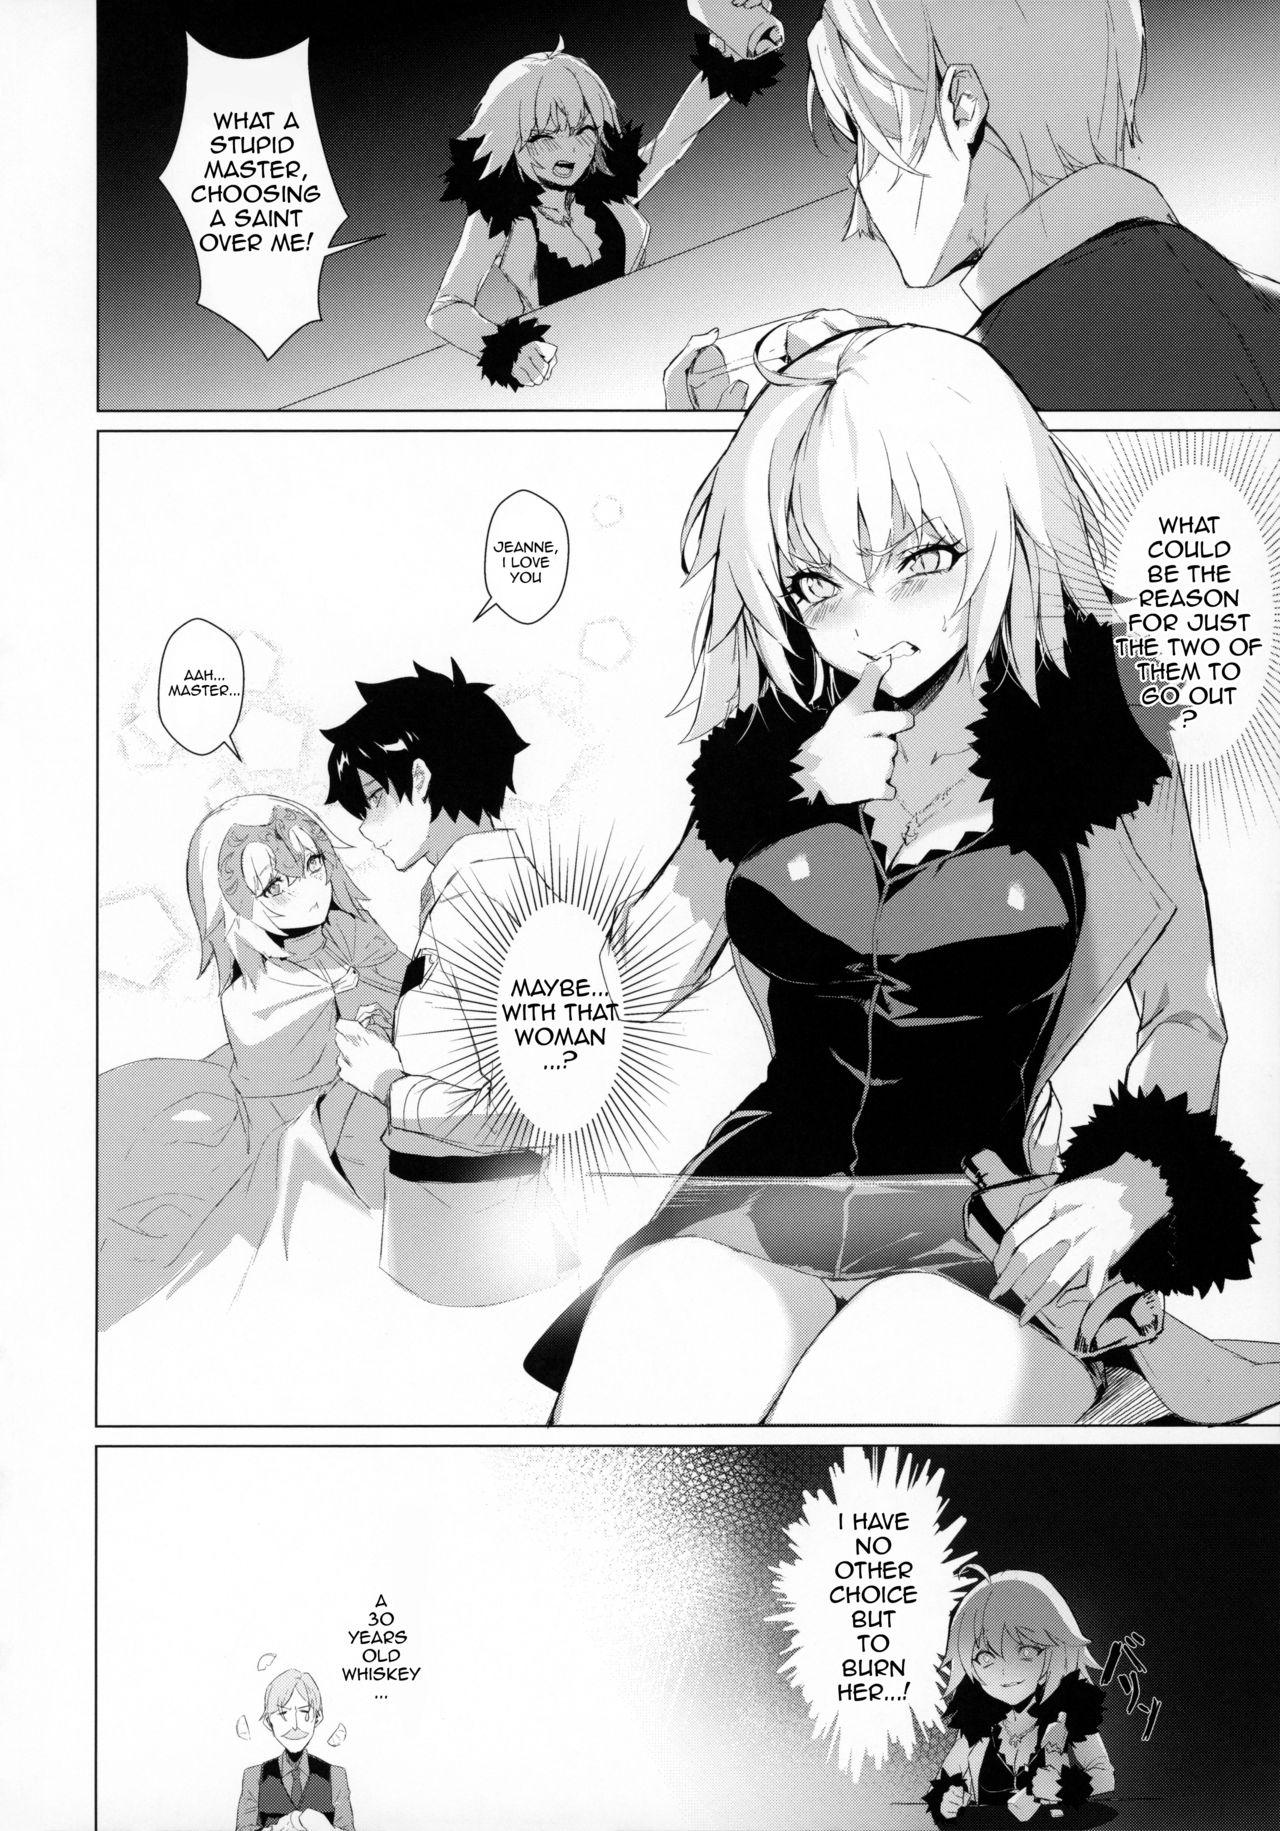 Chica PERROS - Fate grand order Rough Sex - Page 3